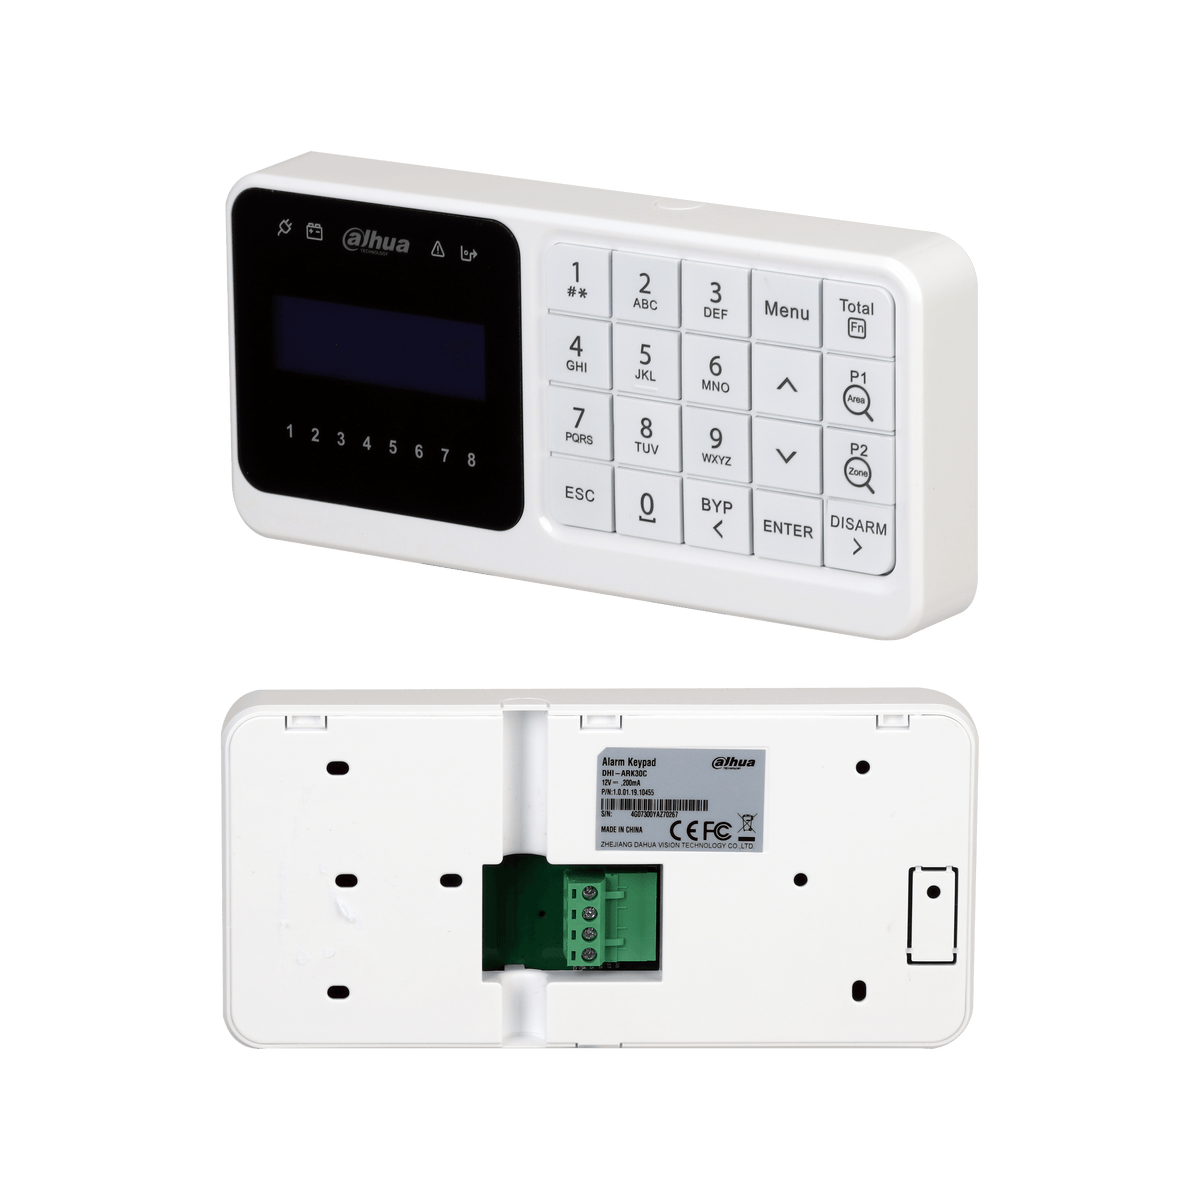 LCD Keypad FOR ARC3008 - Fortress Series ARK30C